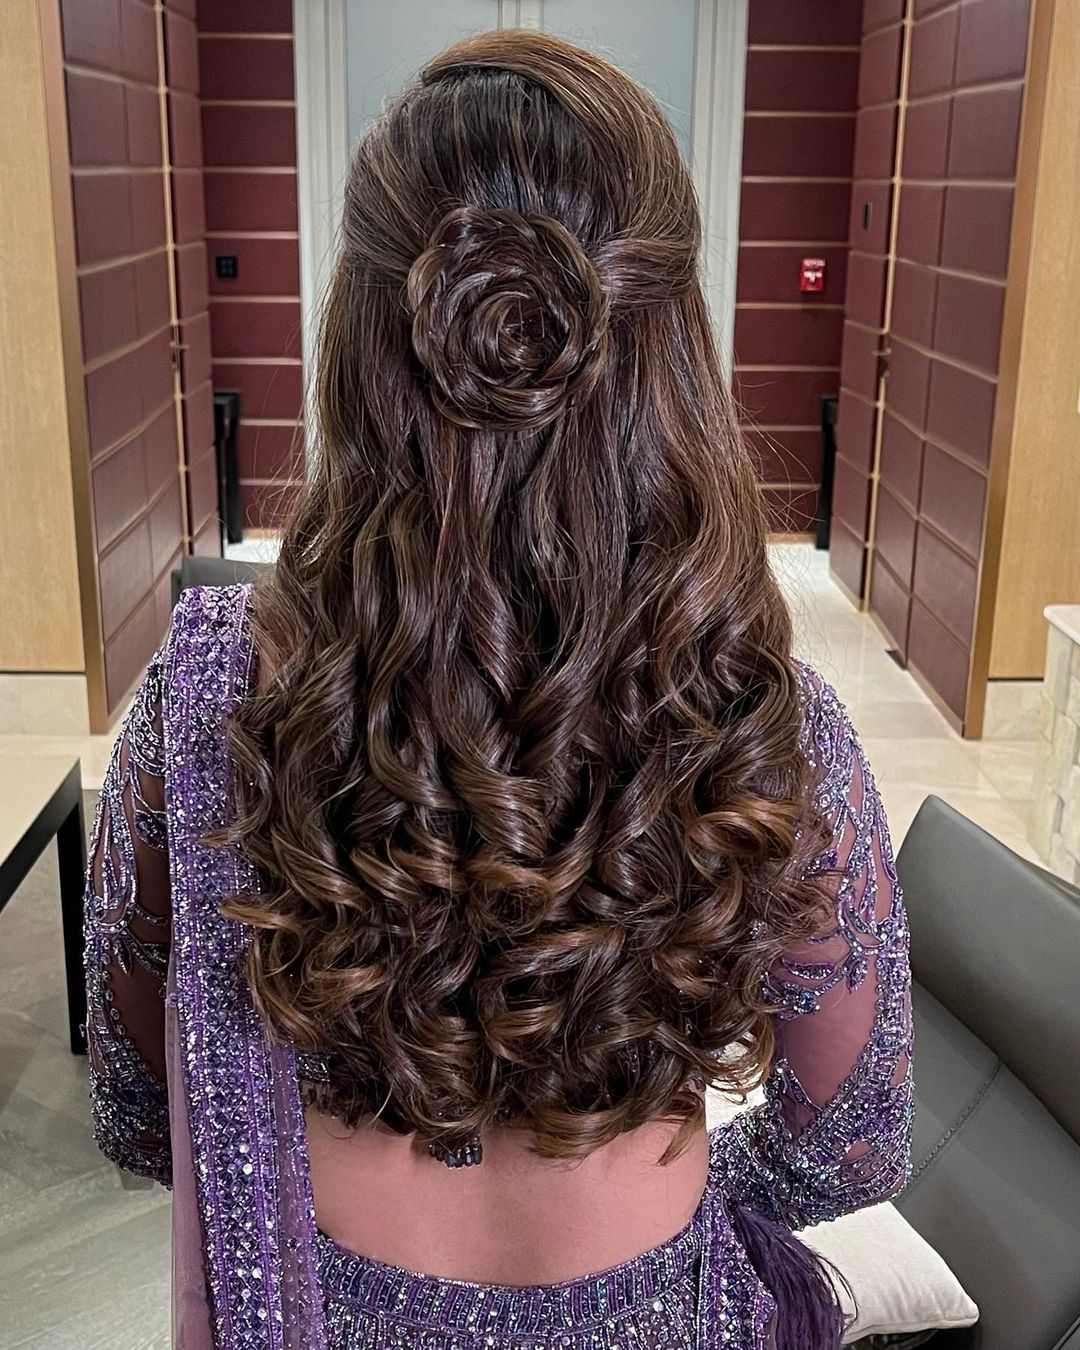 20 Gorgeous Bridal Hairstyles To Give You A Glam Look At Your Reception